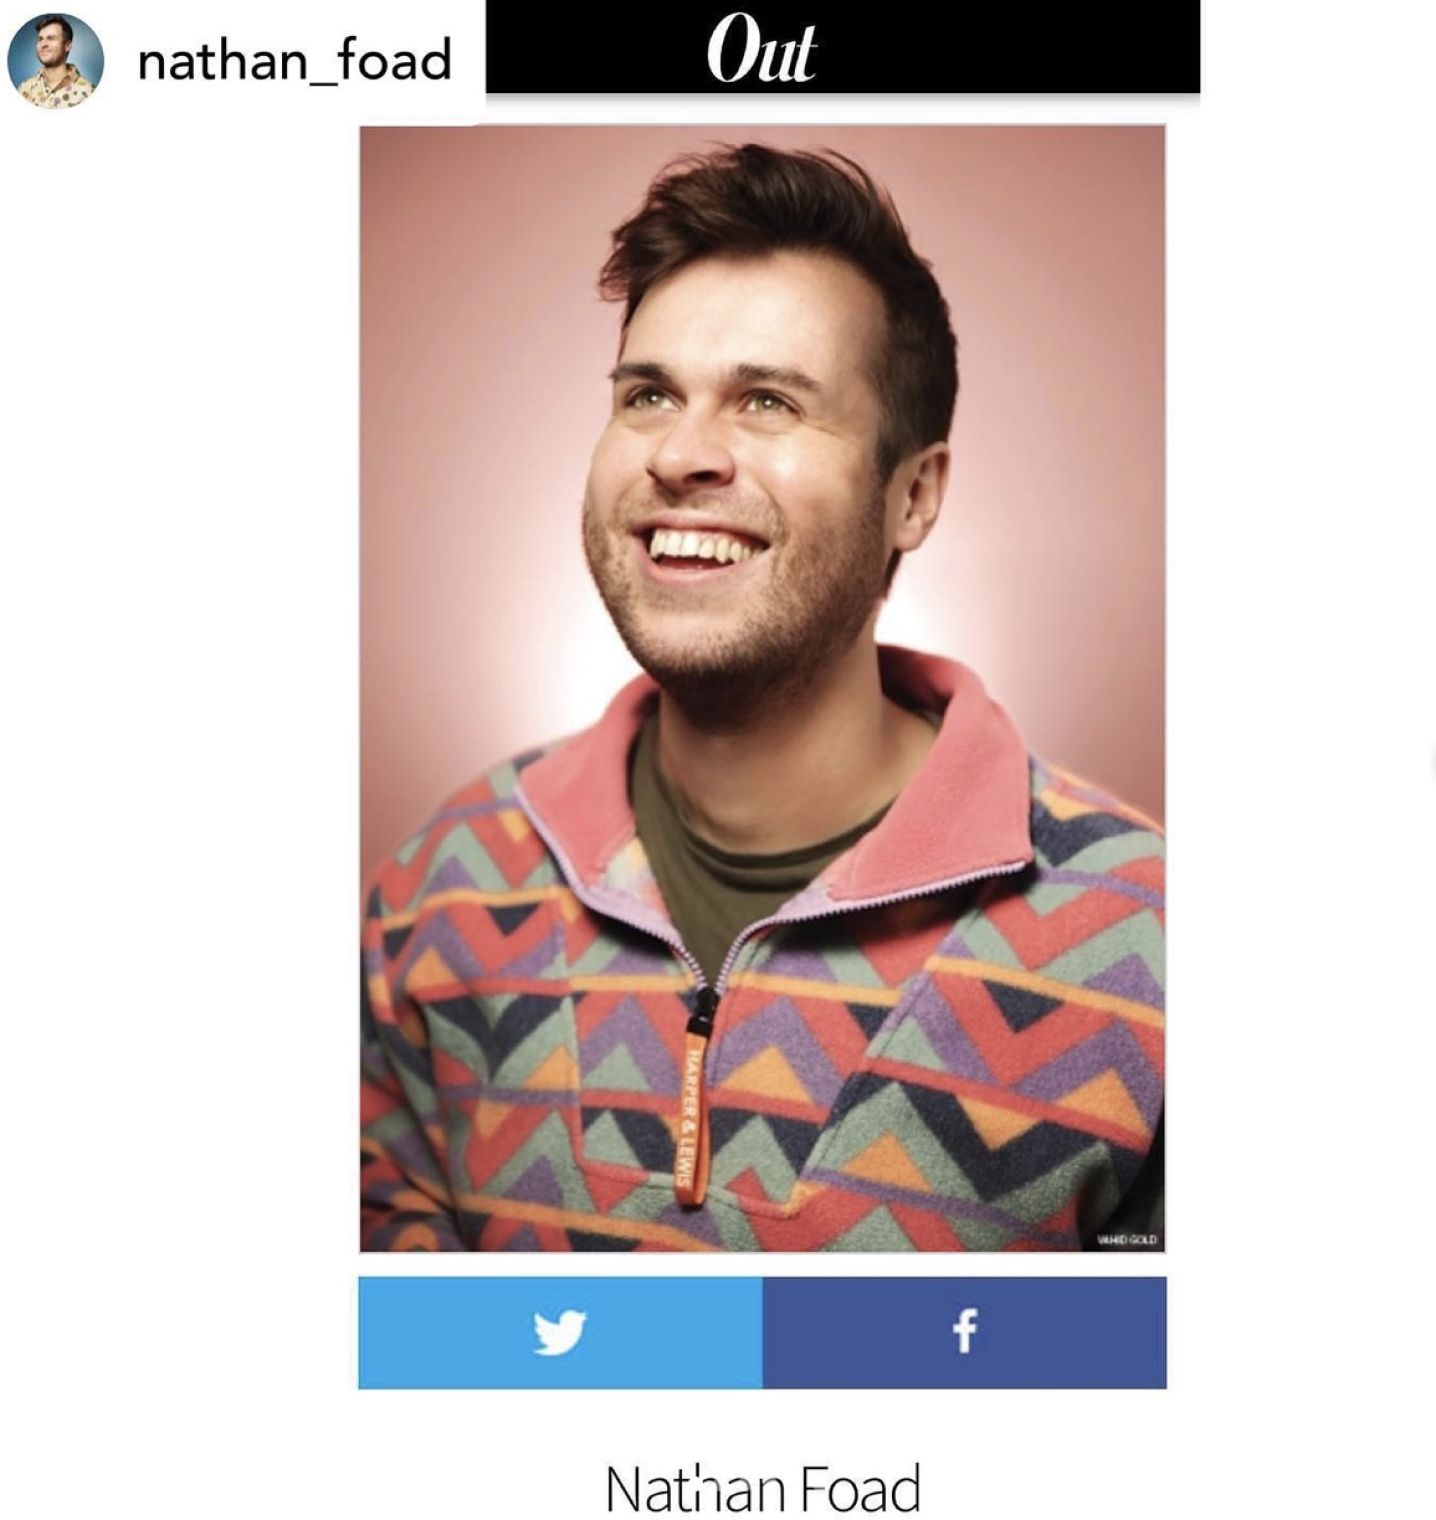 Supremely talented actor, writer and comedian Nathan Foad has been selected for Out Magazine’s OUT100